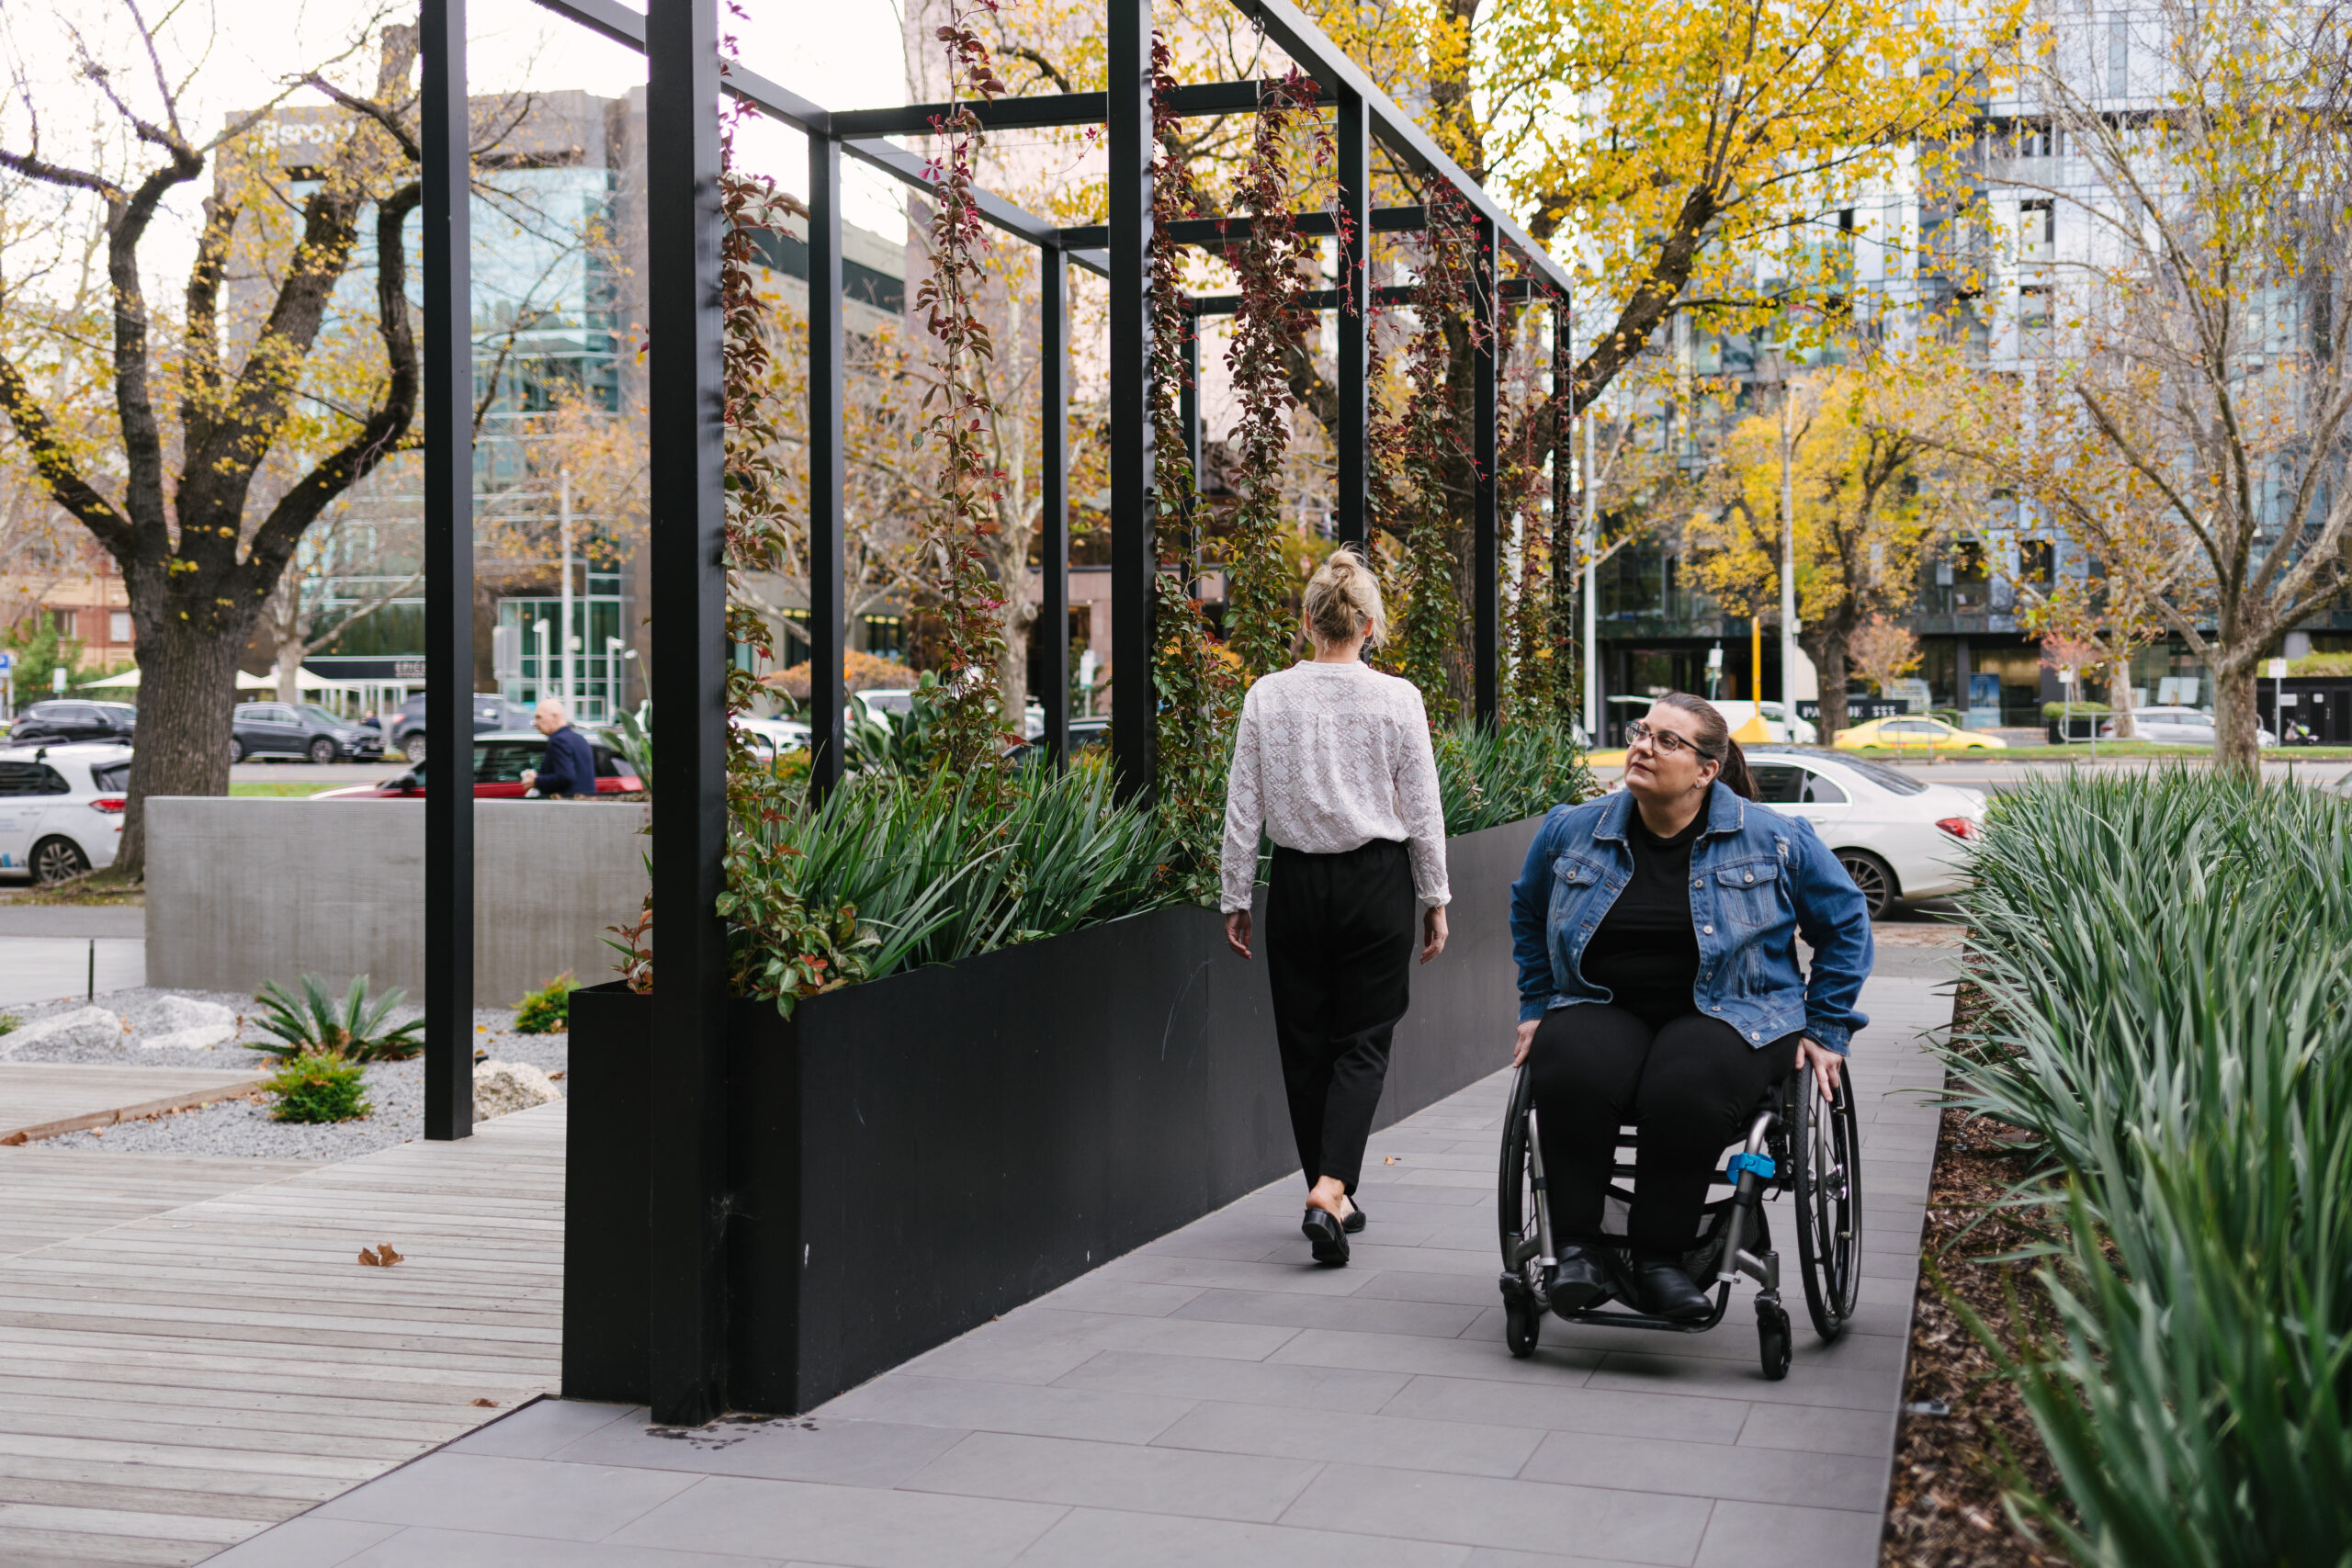 A wheelchair user enjoys the outdoors, facing away from the camera on a sidewalk with lush plants and trees in the surroundings.